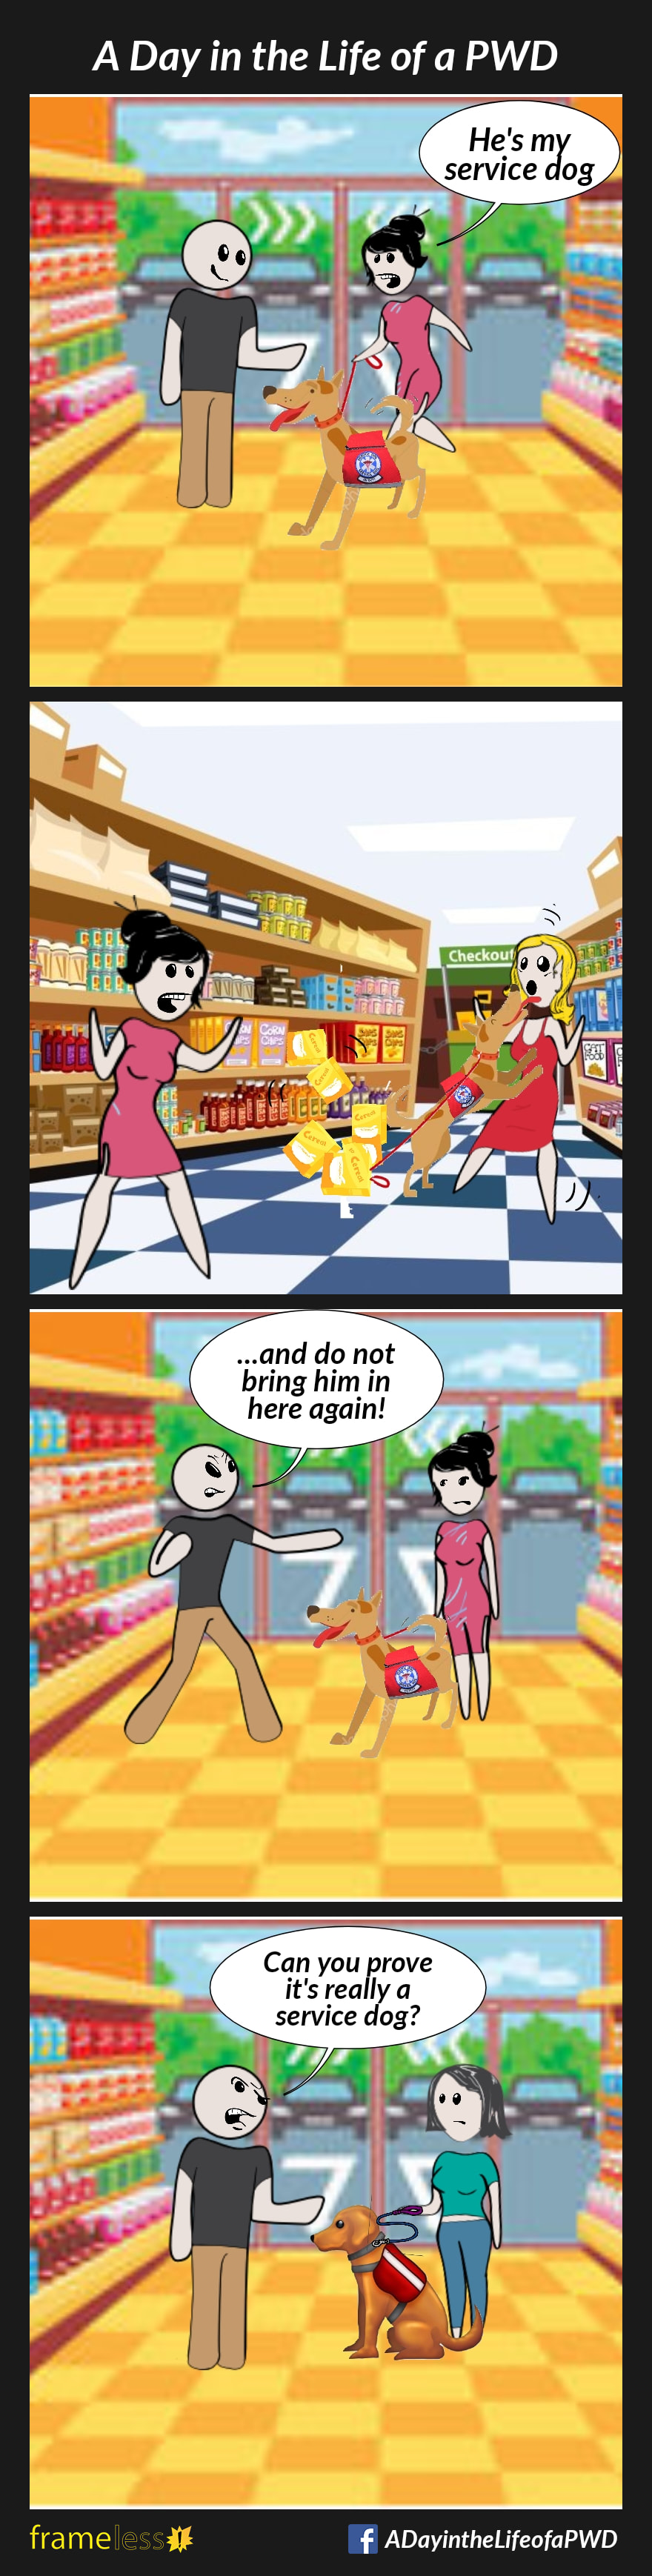 COMIC STRIP 
A Day in the Life of a PWD (Person With a Disability) 

Frame 1:
A woman enters a grocery store with a dog wearing a service vest. They are greeted by a smiling clerk.
WOMAN: He's my service dog.

Frame 2:
The dog gets away from the woman, knocking over a display and jumping up on another customer, licking her face.

Frame 3:
The clerk kicks the woman and her dog out of the store.
CLERK: ...and do not bring him in here again!

Frame 4:
Later, another woman enters the store with her legitimate service dog.
The clerk greets them suspiciously. 
CLERK: Can you prove it's really a service dog?